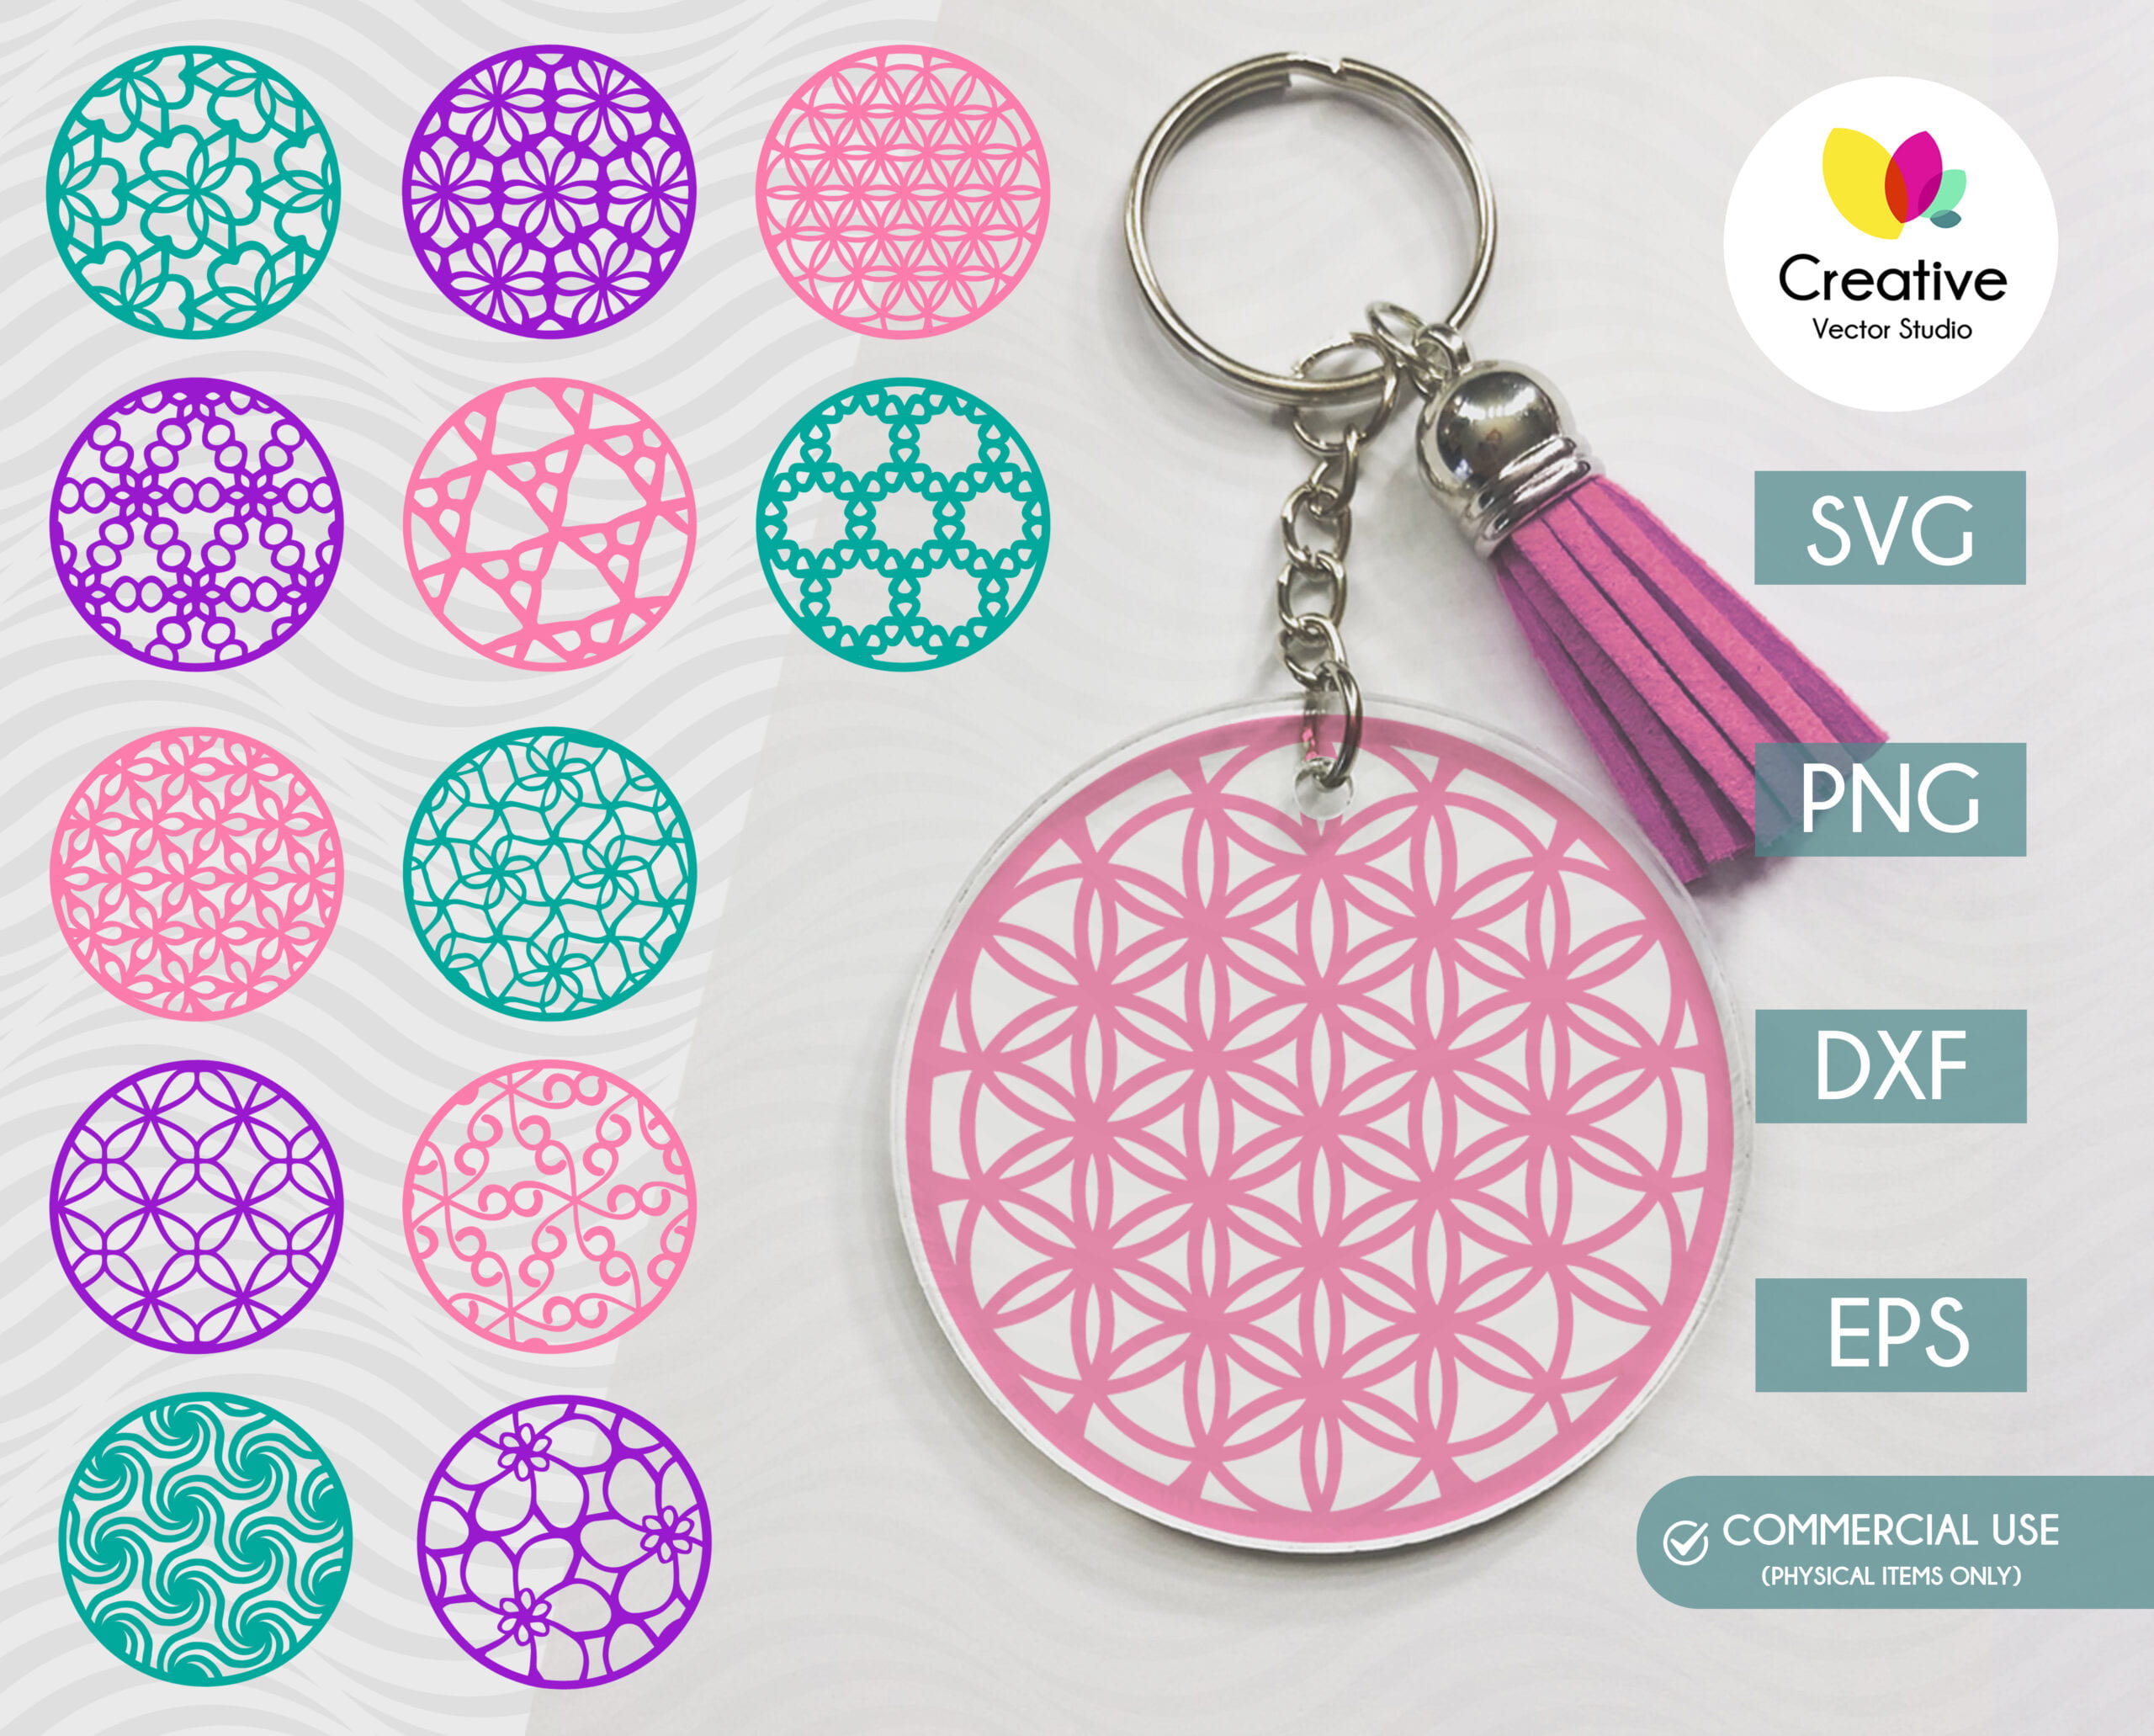 Once your order is placed, you will receive the following archived files: Keychain Round Pattern Svg Creative Vector Studio